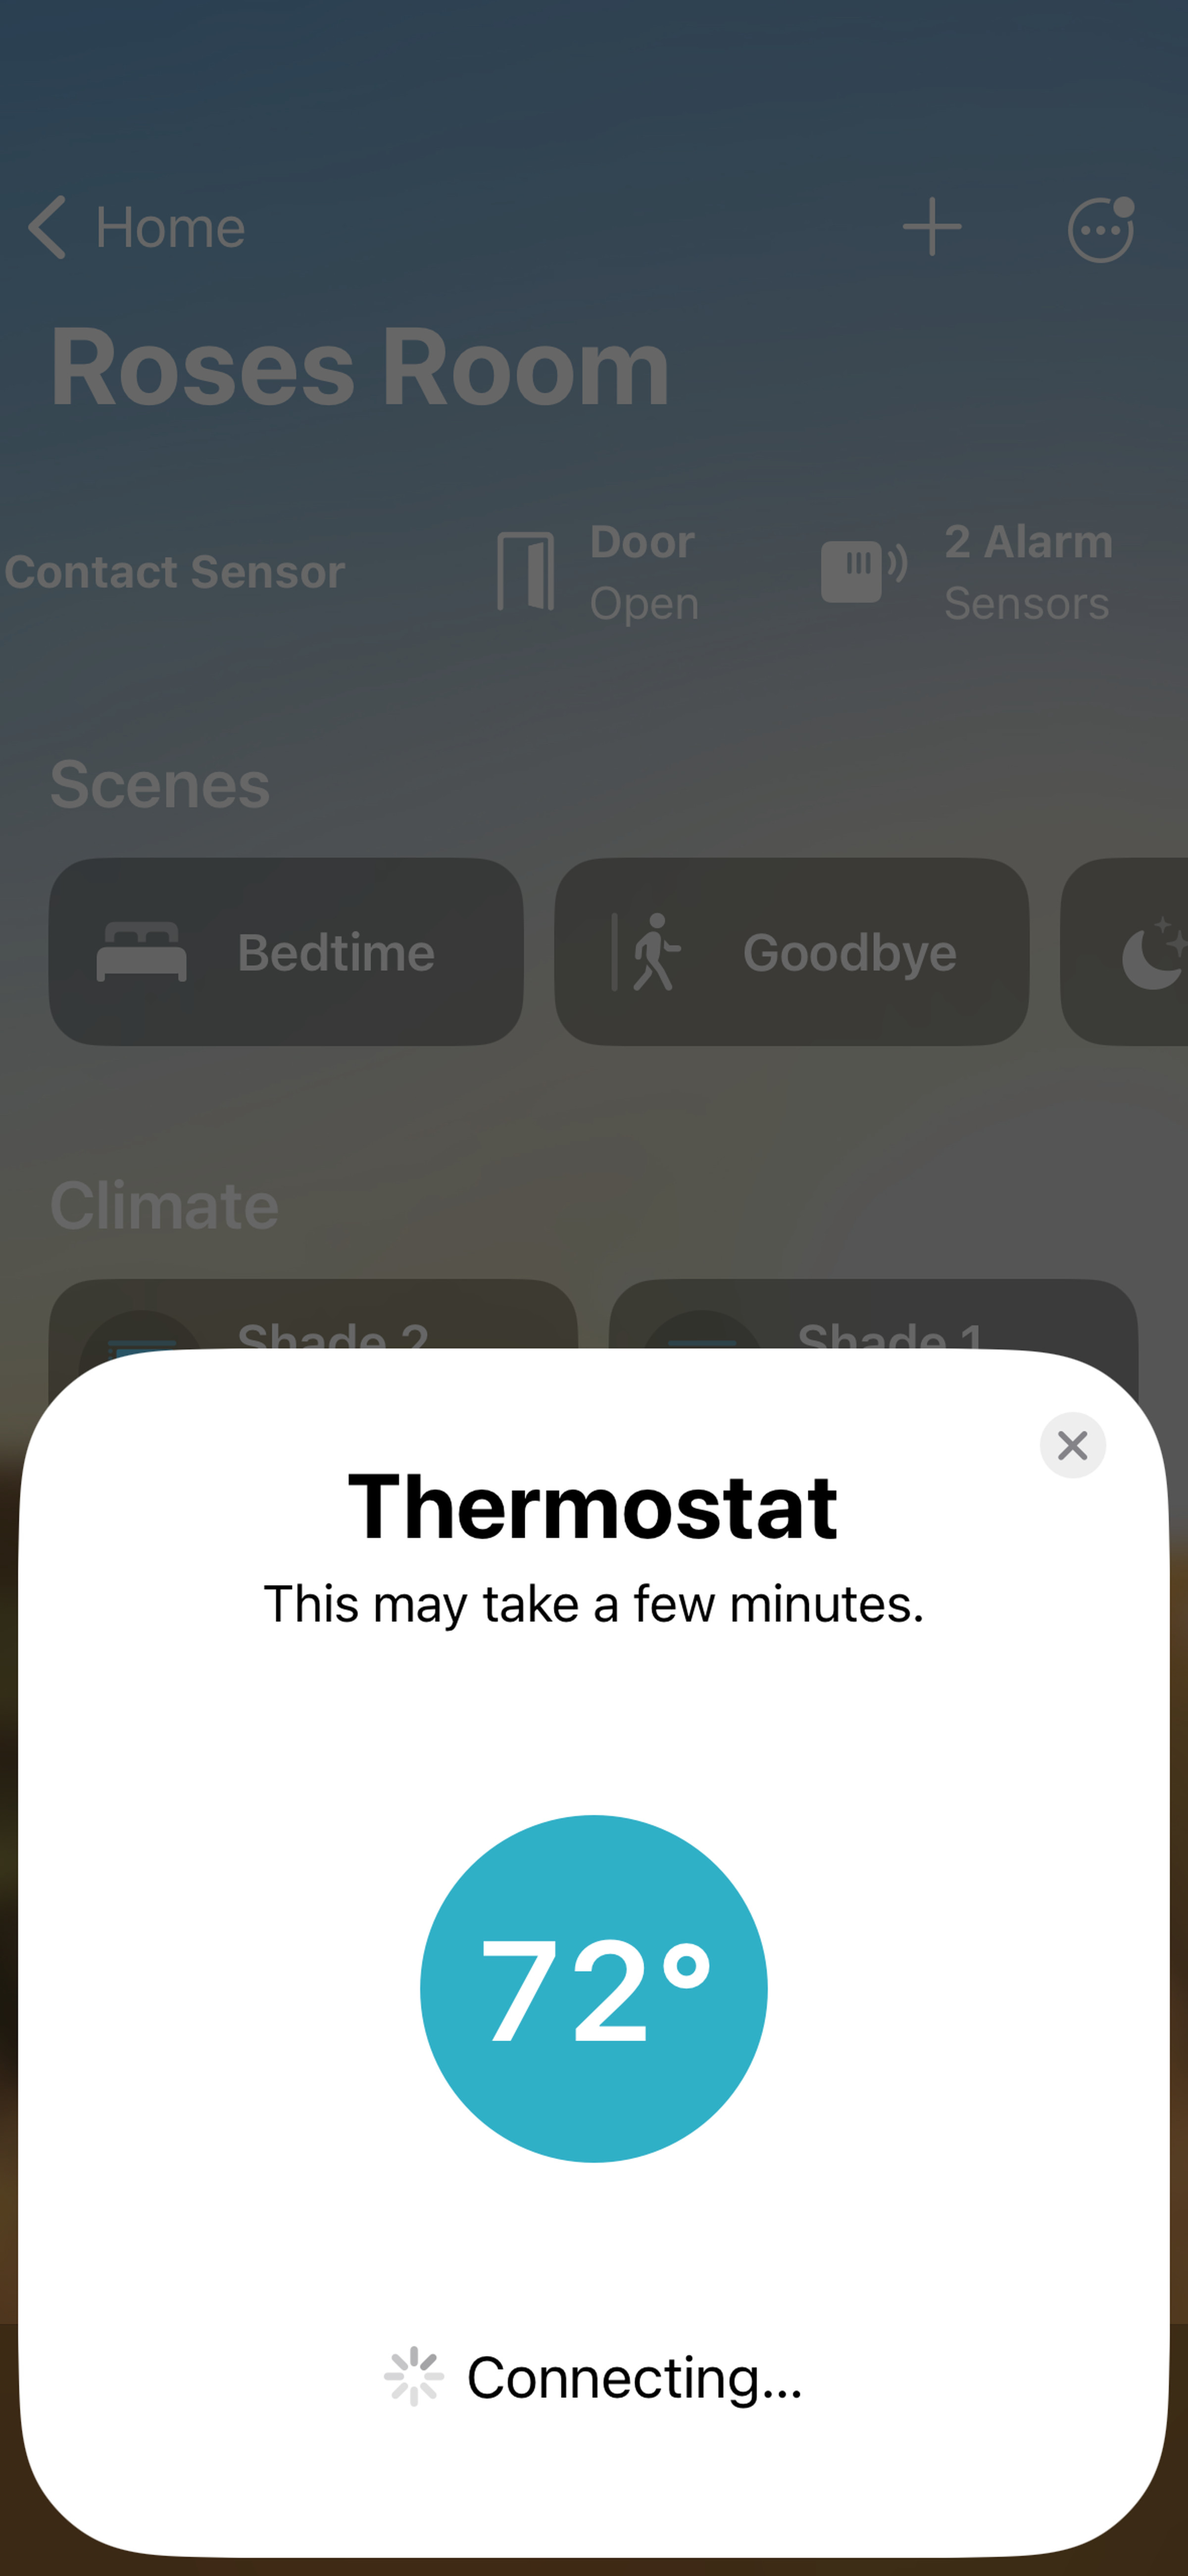 <em>You’ll be prompted to enter your code, and the thermostat will connect. Be patient, as this can take some time.</em>